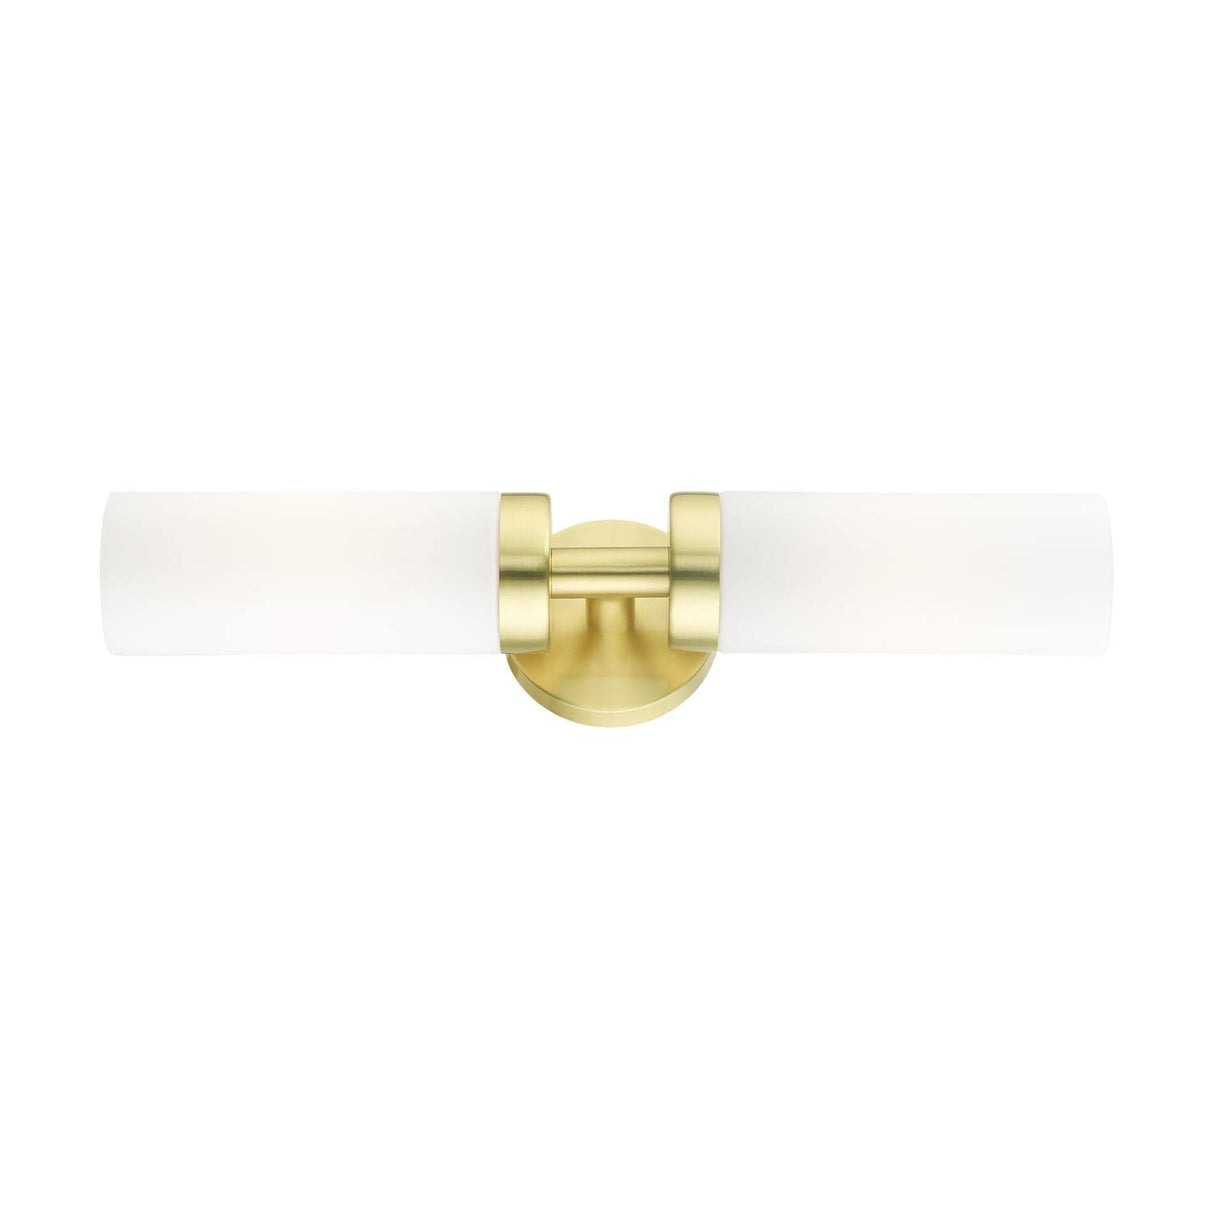 Livex Lighting 15072-12 Aero - 2 Light ADA Bath Vanity in Aero Style - 19.25 Inches Wide by 4.25 Inches high, Satin Brass Finish with Satin Opal White Glass